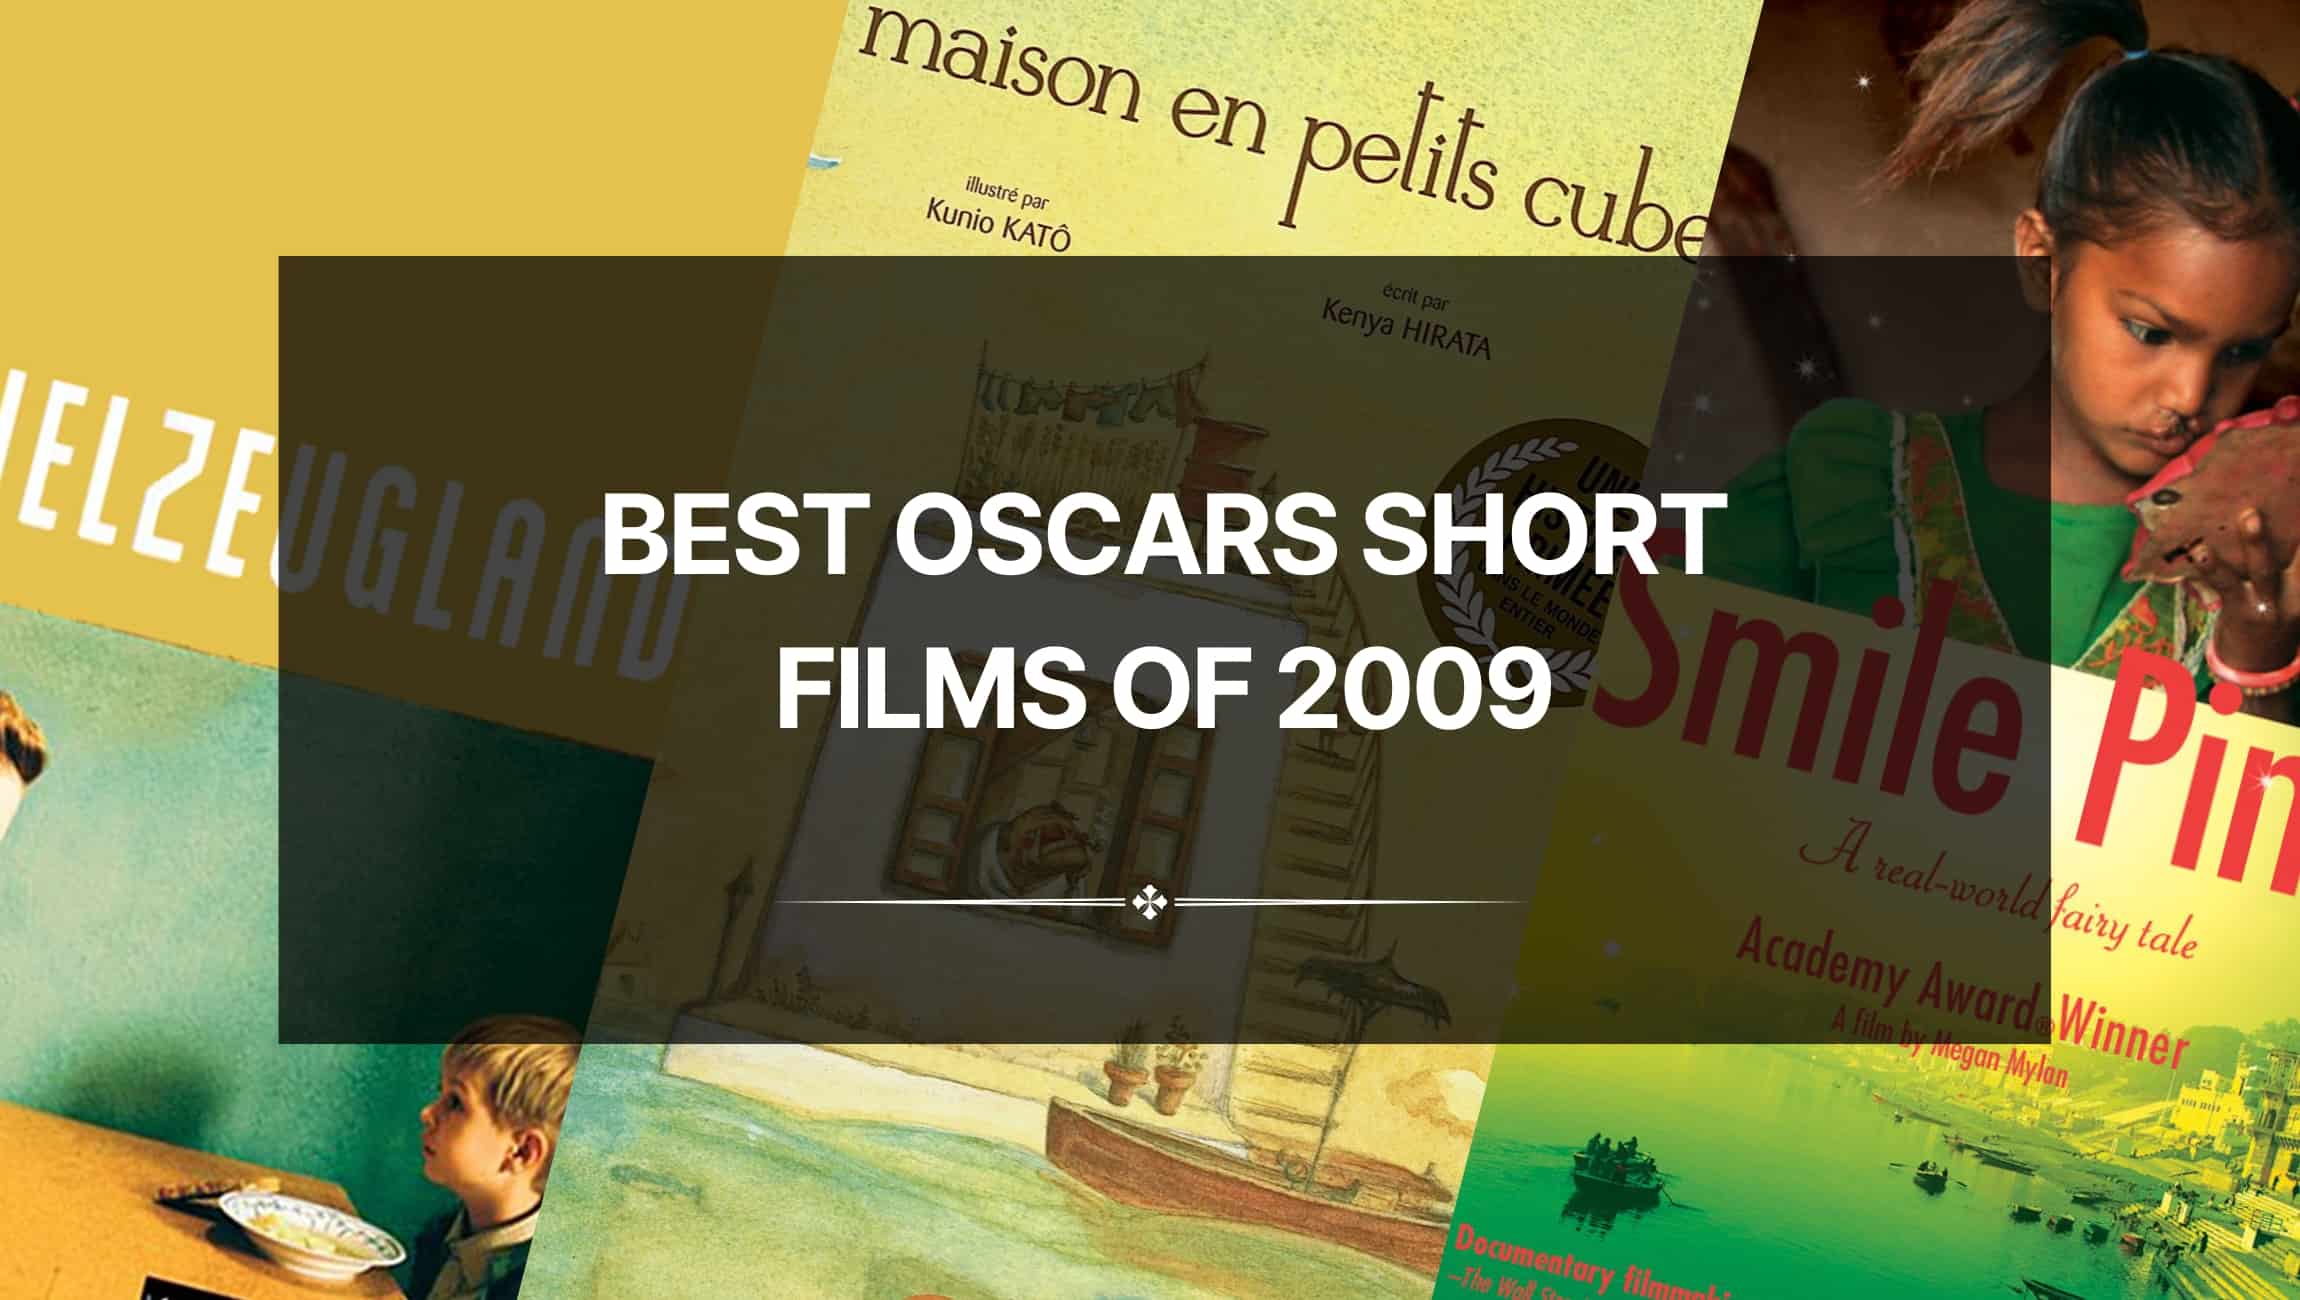 The Best Oscars Short Films of 2009: Compelling Visions